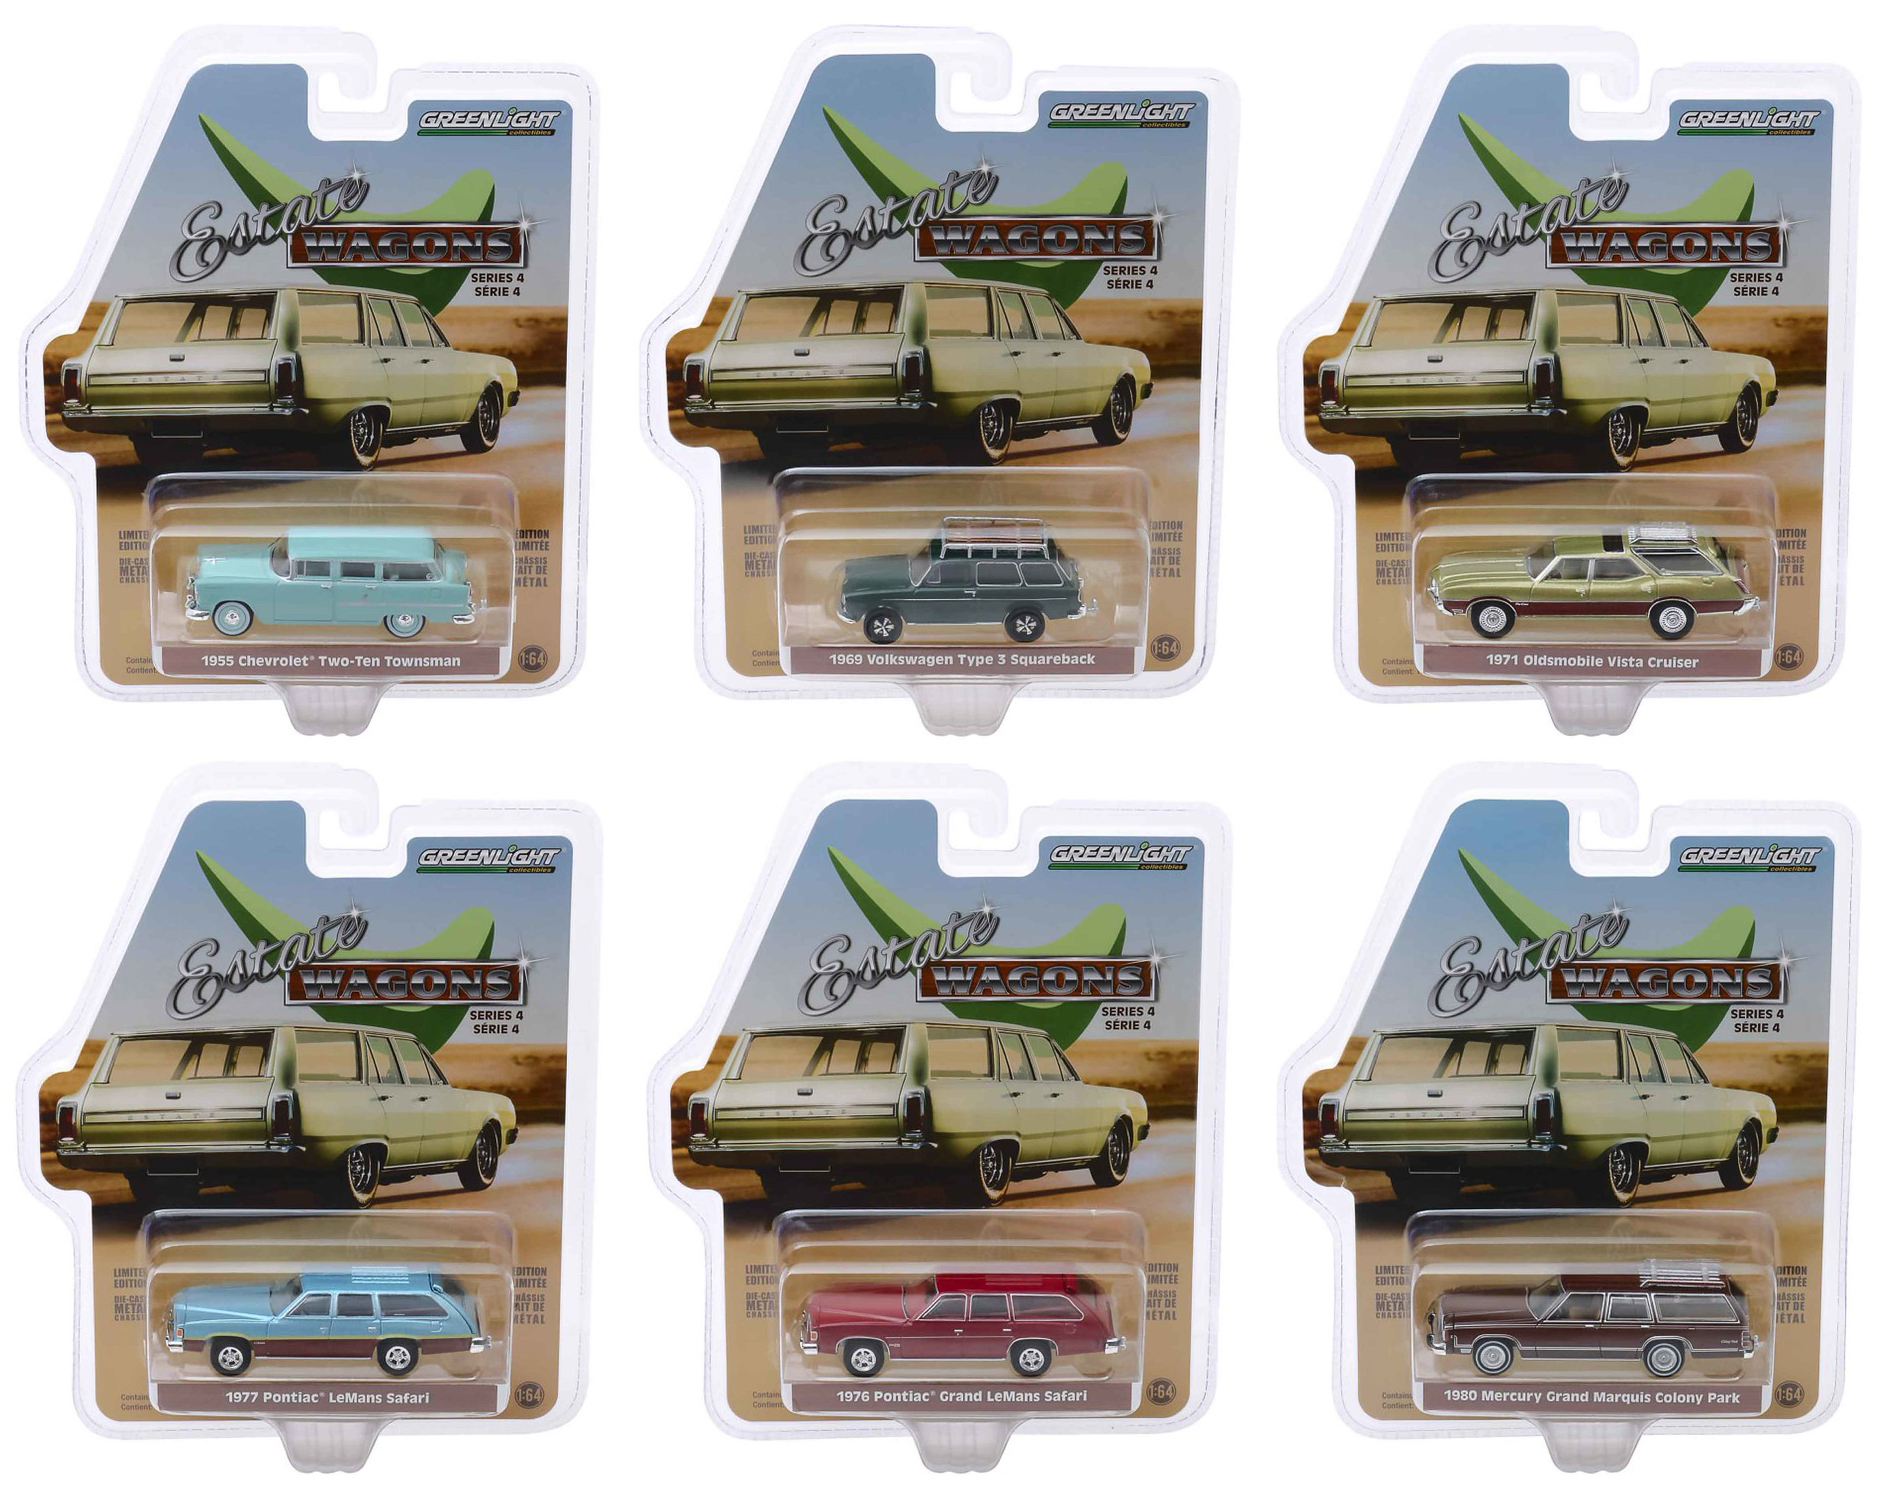 "Estate Wagons" Series 4 6 piece Set 1/64 Diecast Model Cars by Greenlight